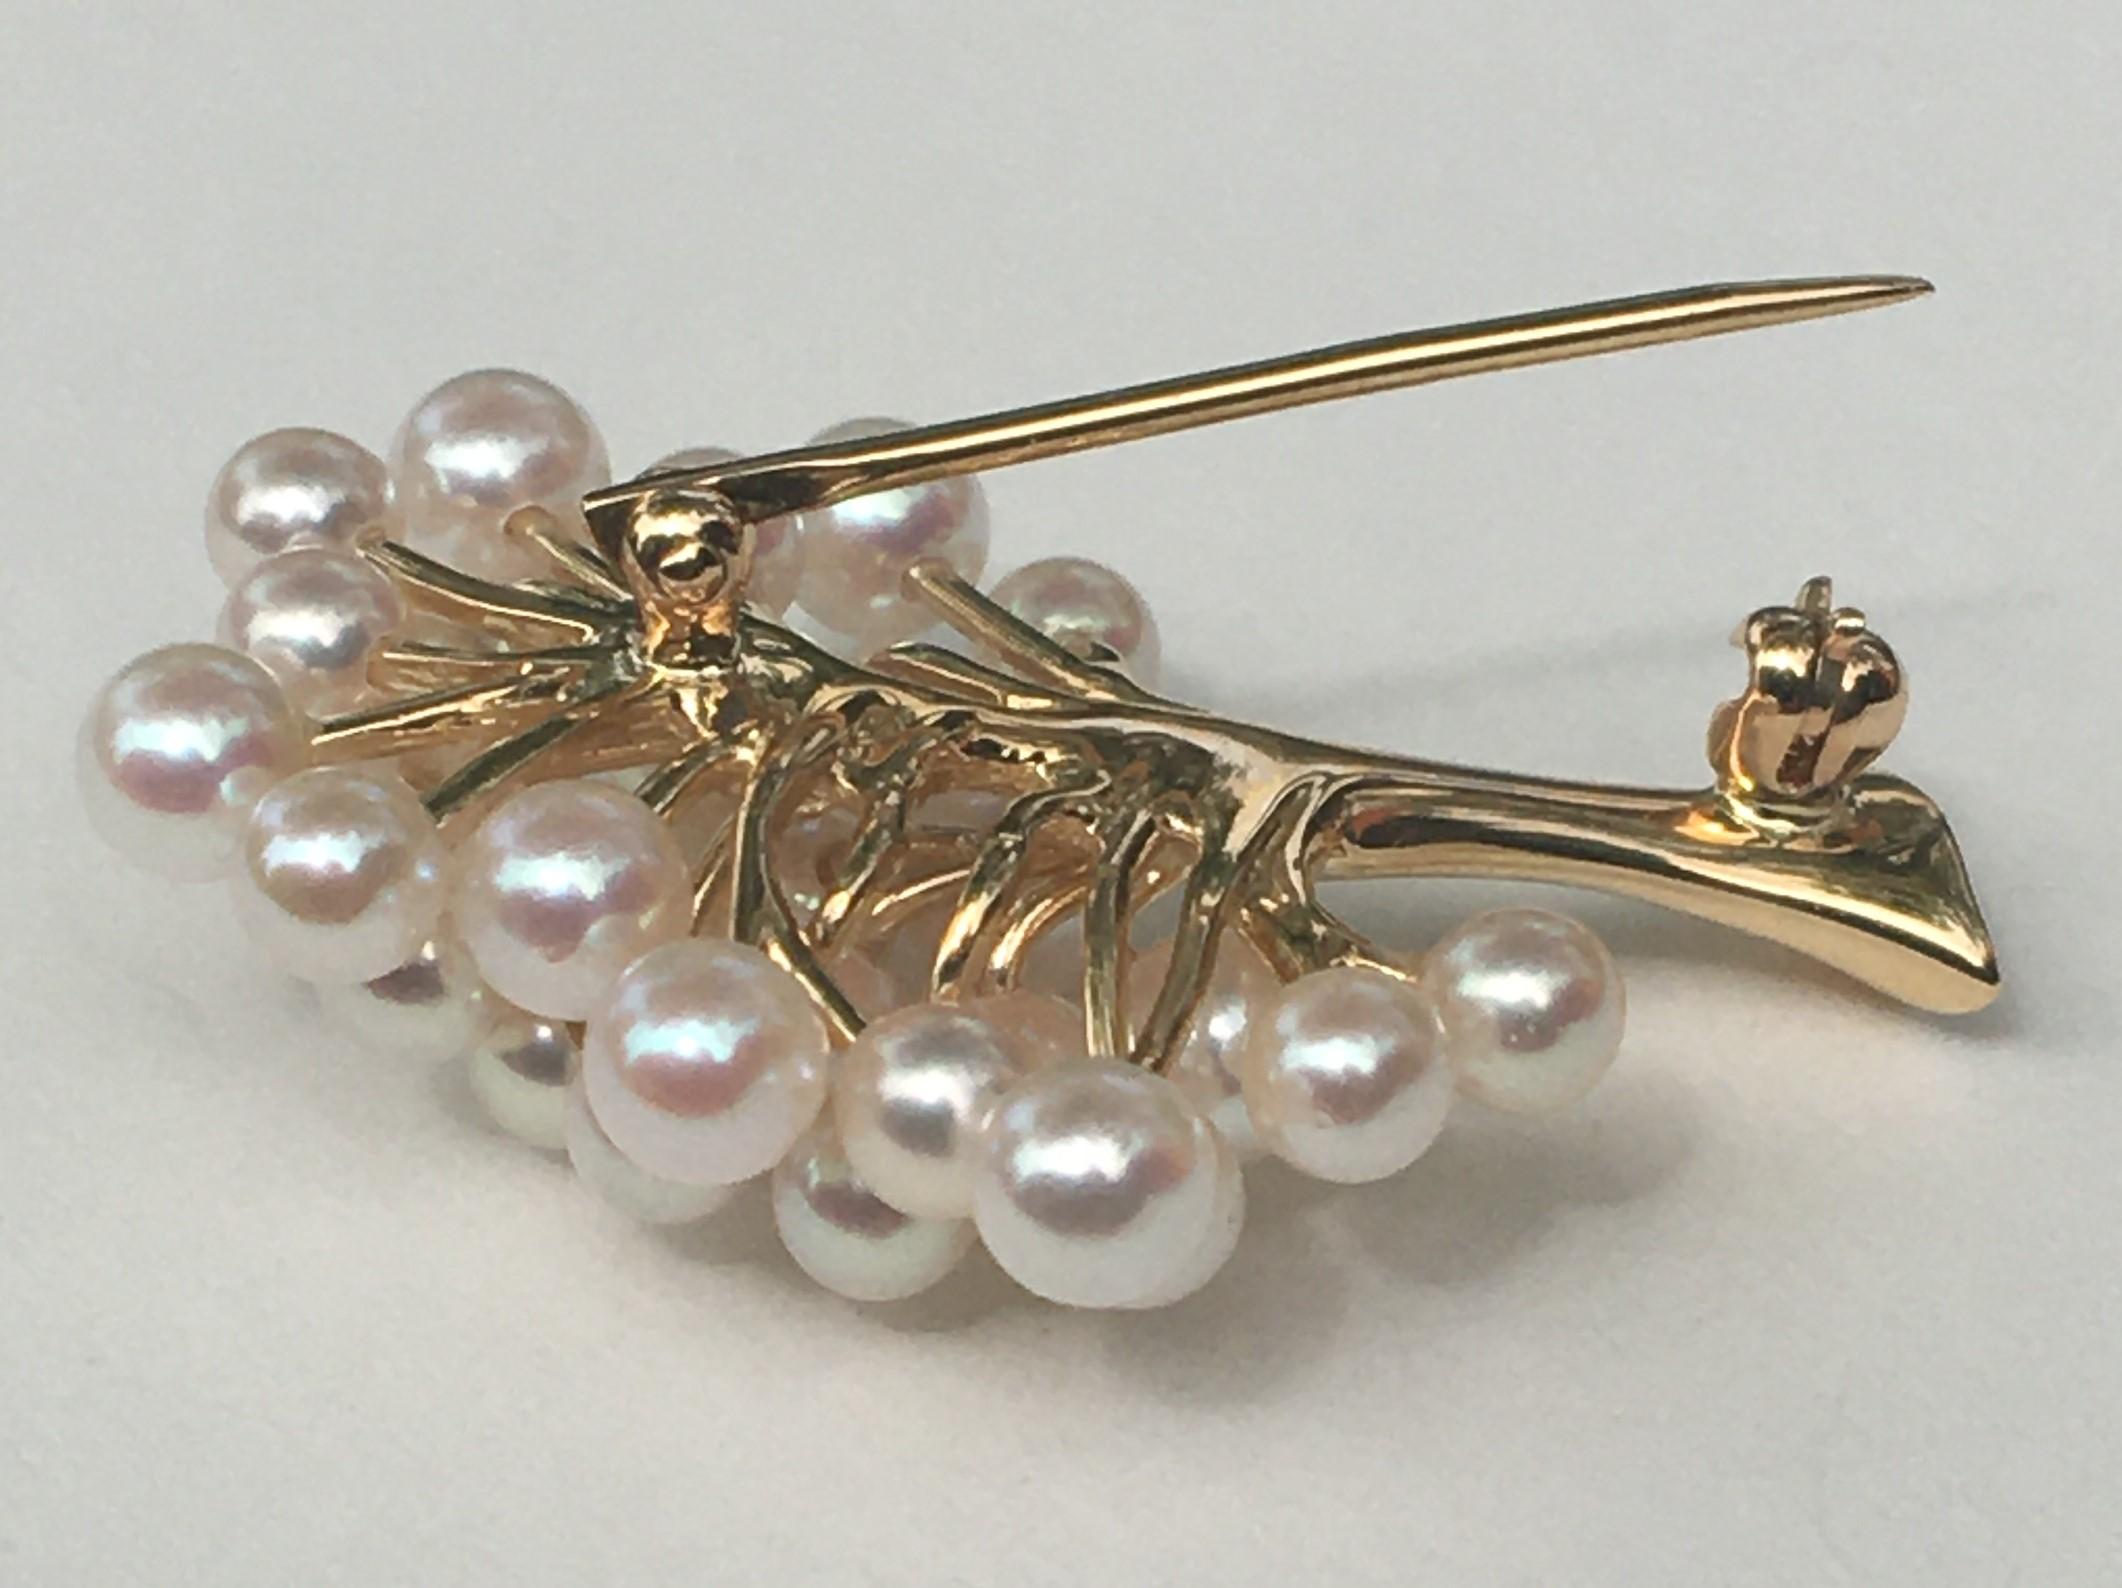 This adorable brooch can be worn with any outfit!
14 karat yellow gold
28 round white pearls of varying sizes
Approximately 33mm tall and 26mm wide
Stick pin with safety 
Stamped 